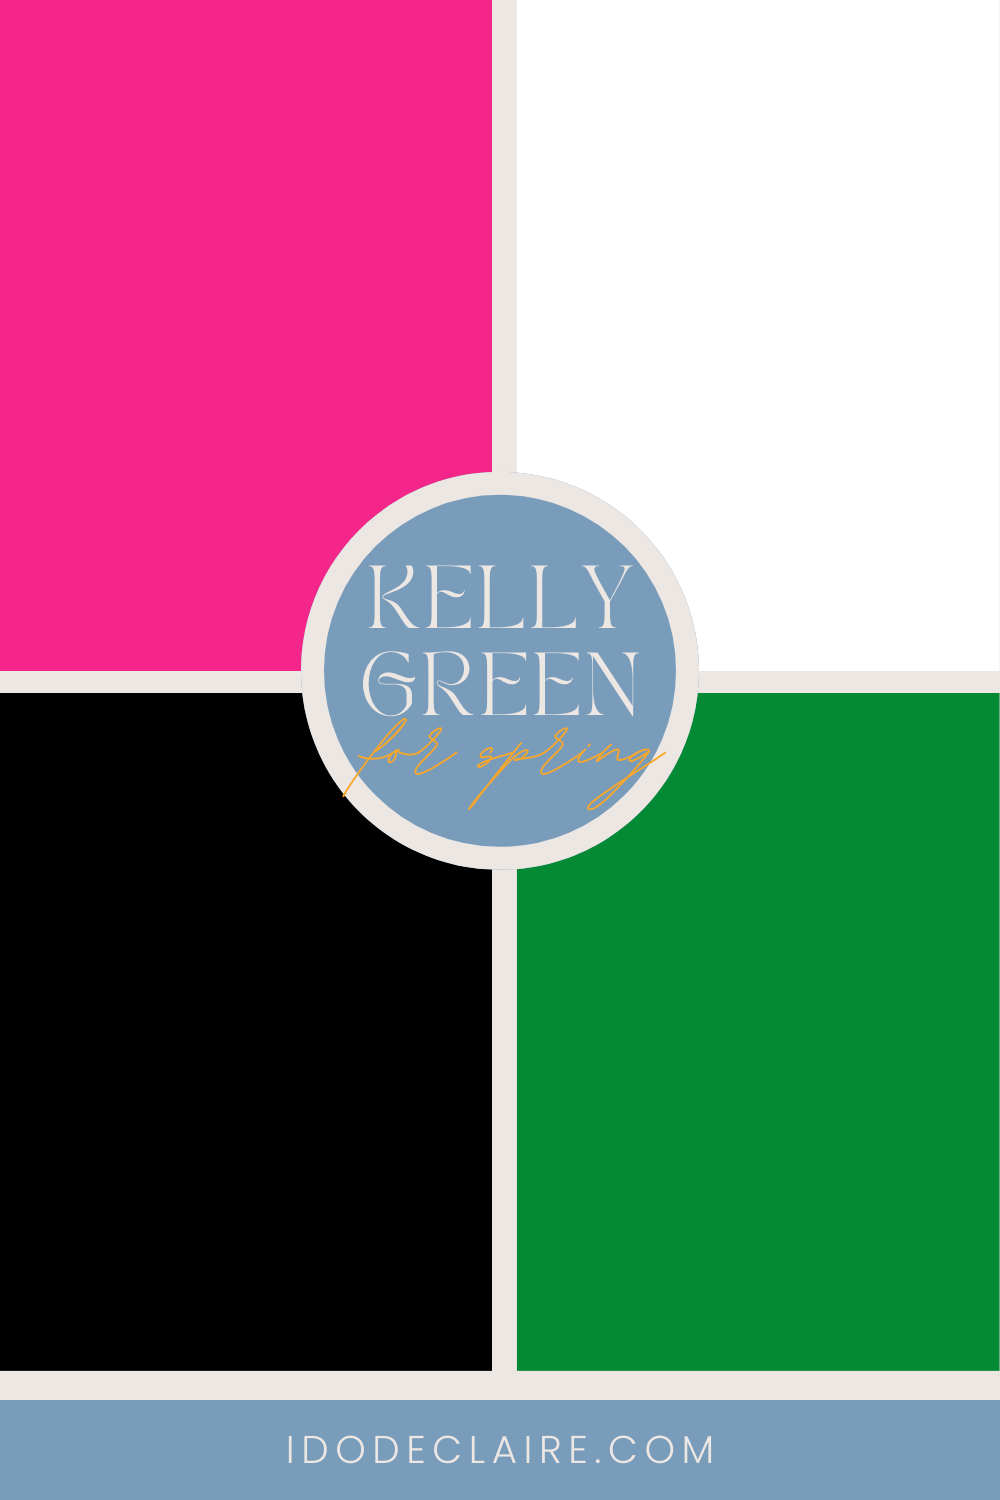 Going (Kelly) Green